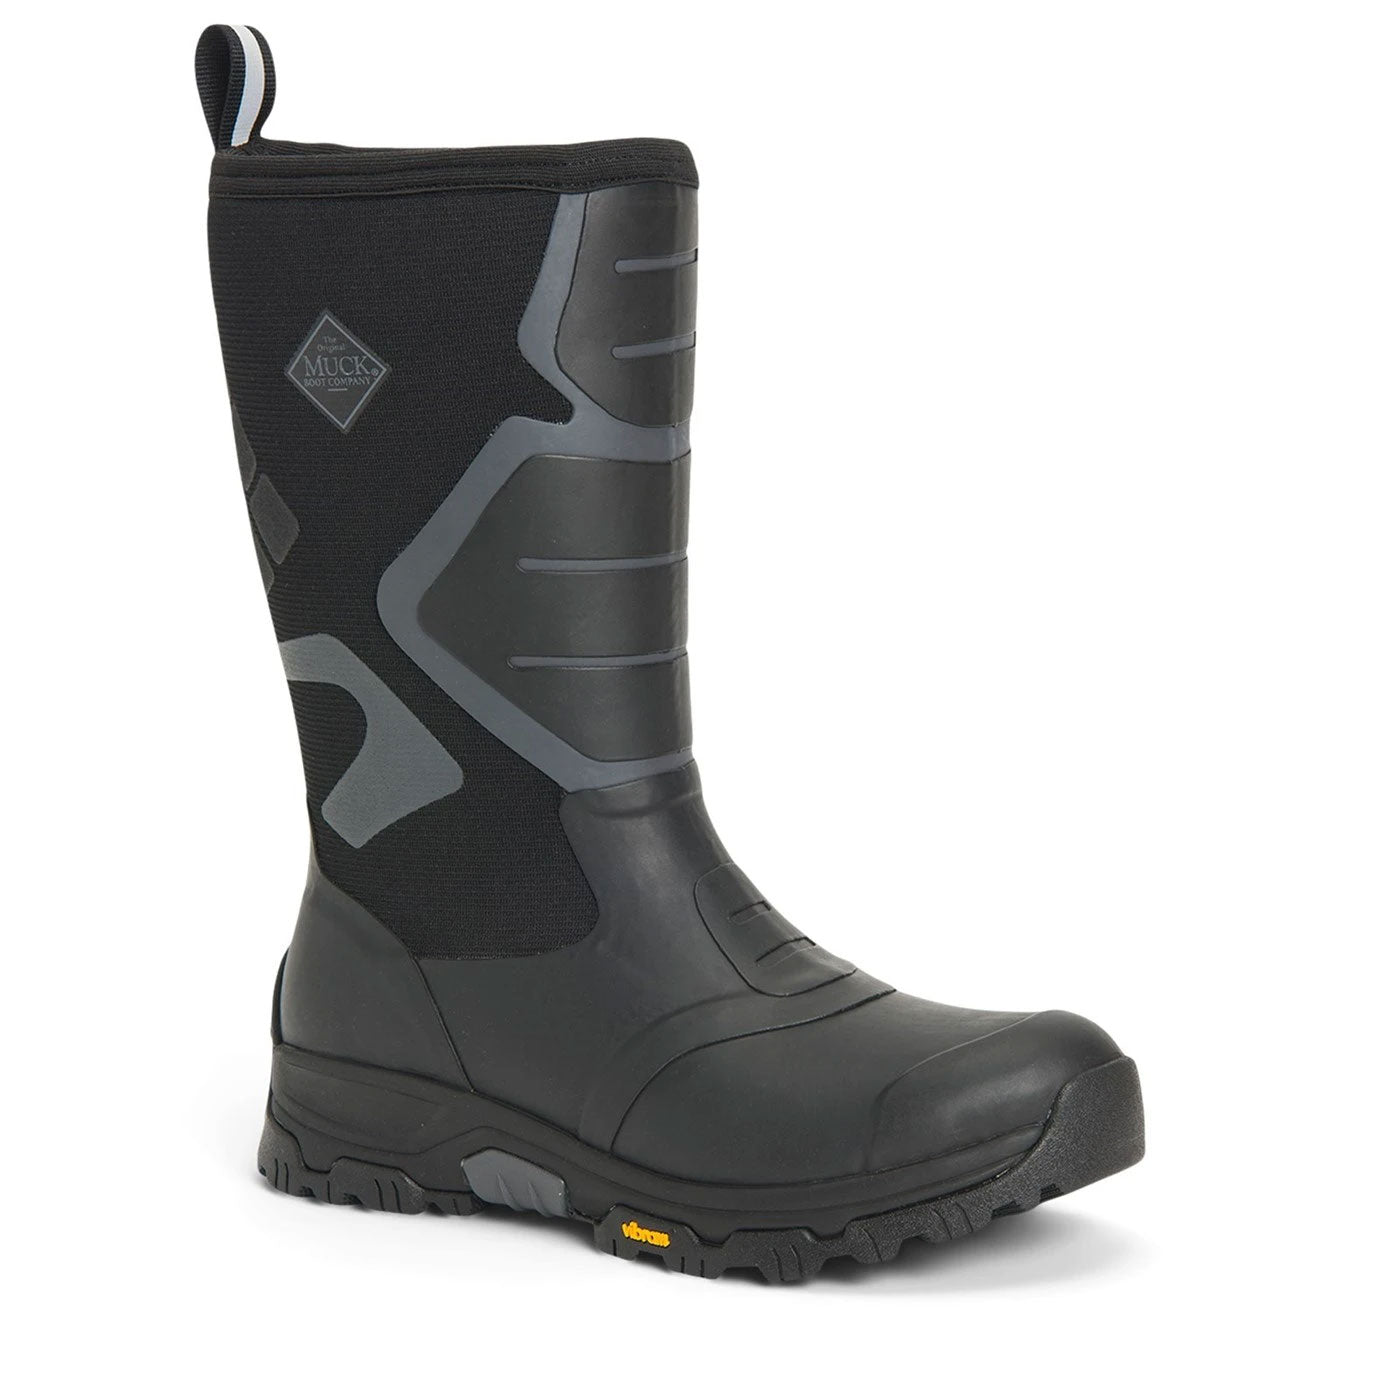 Apex Pro AG All Terrain Short Boots by The Original Muck Boot Company 